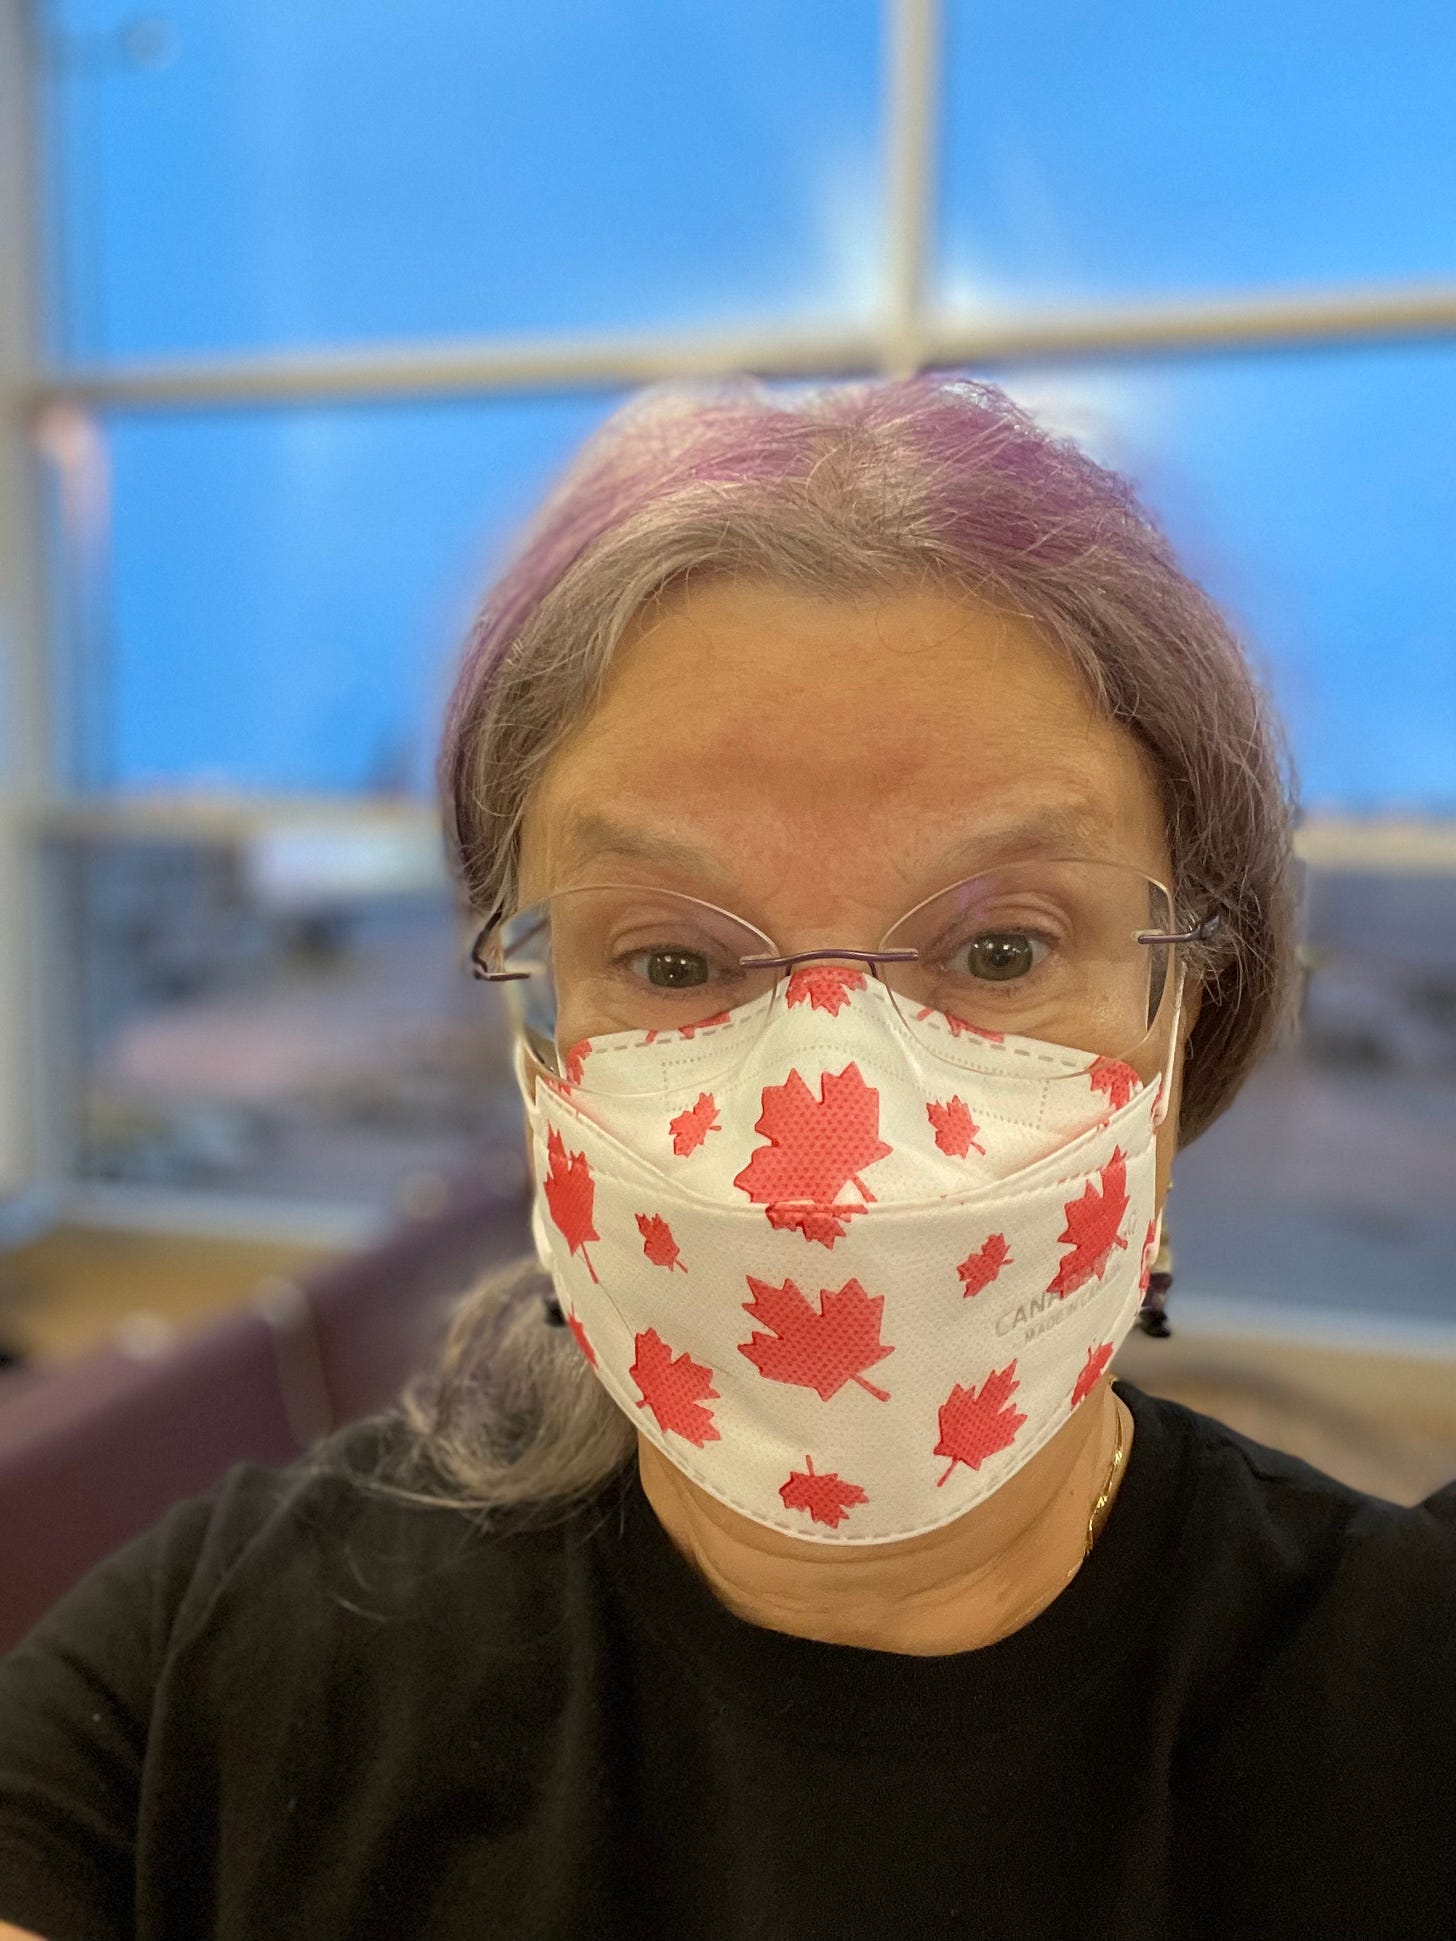 Silver and purple haired femme with glasses wearing a white KN95 mask with red maple leaf images on it, with a blue sky through a window in the background